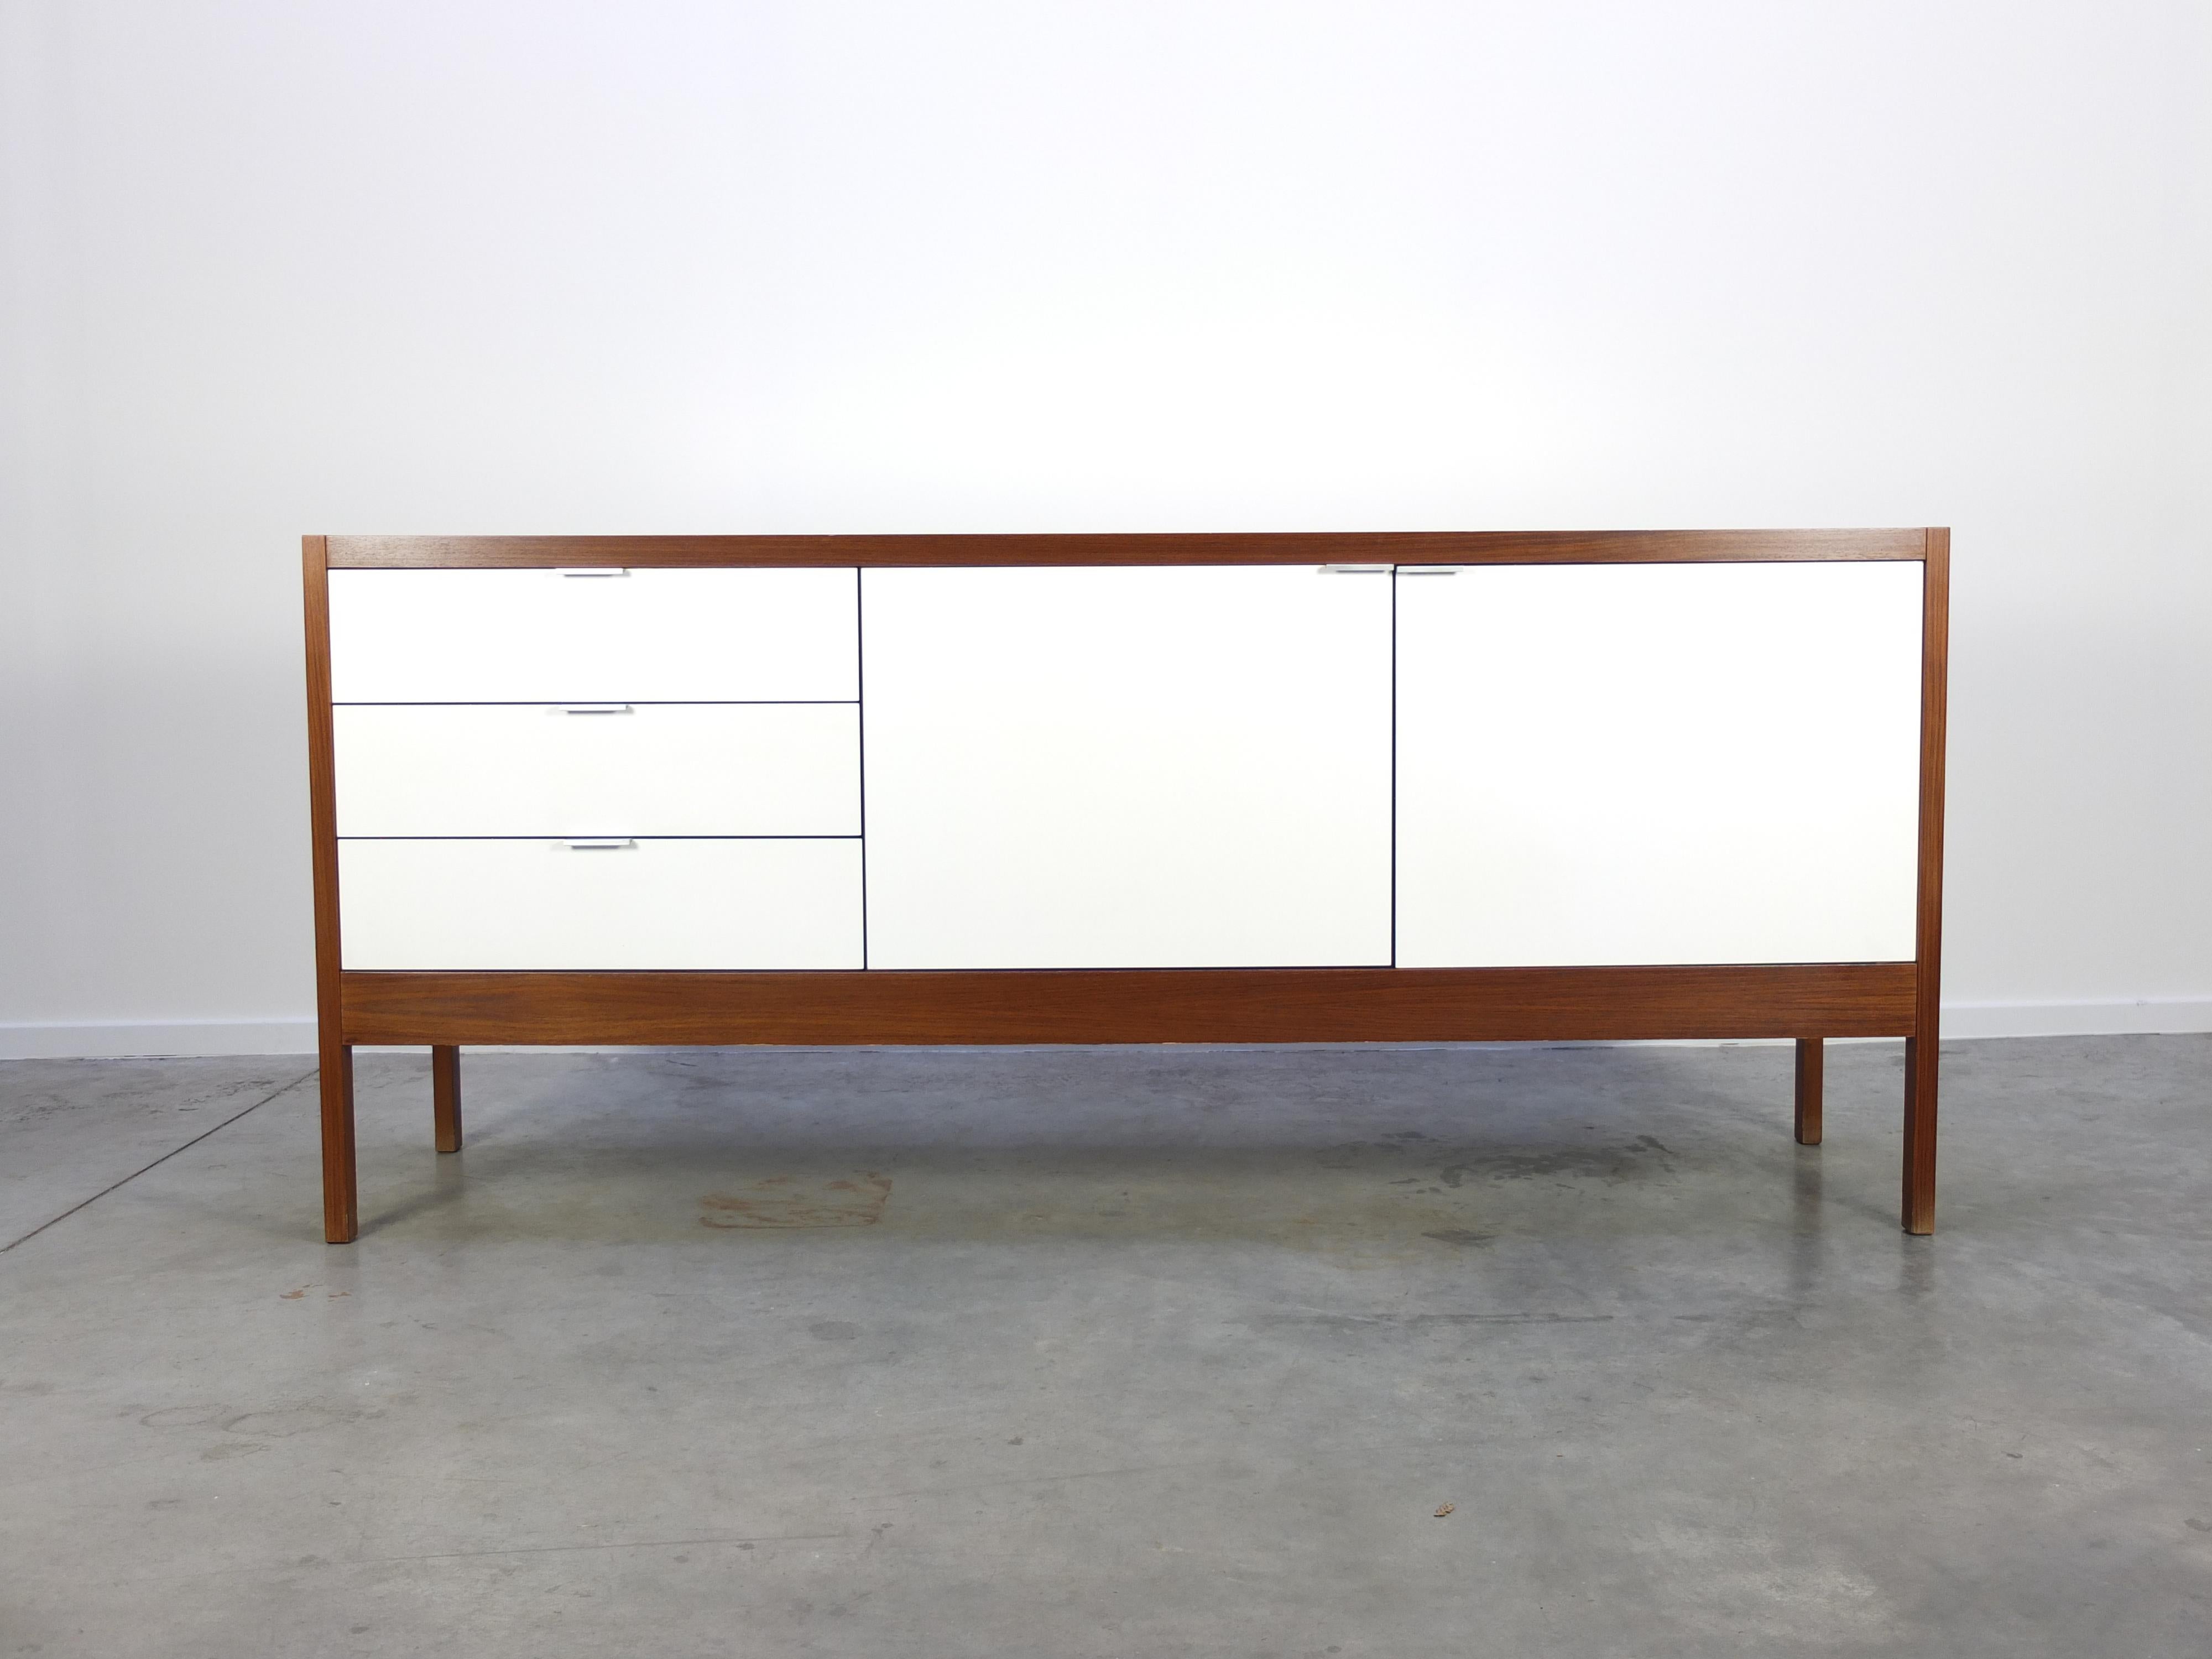 A special high-end sideboard from the ‘Series 3’ designed by Dieter Waeckerlin in 1963 for his Swiss company Idealheim. It has a solid walnut frame with a white laminated front, top and back. It features three drawers on the left and 2 doors on the